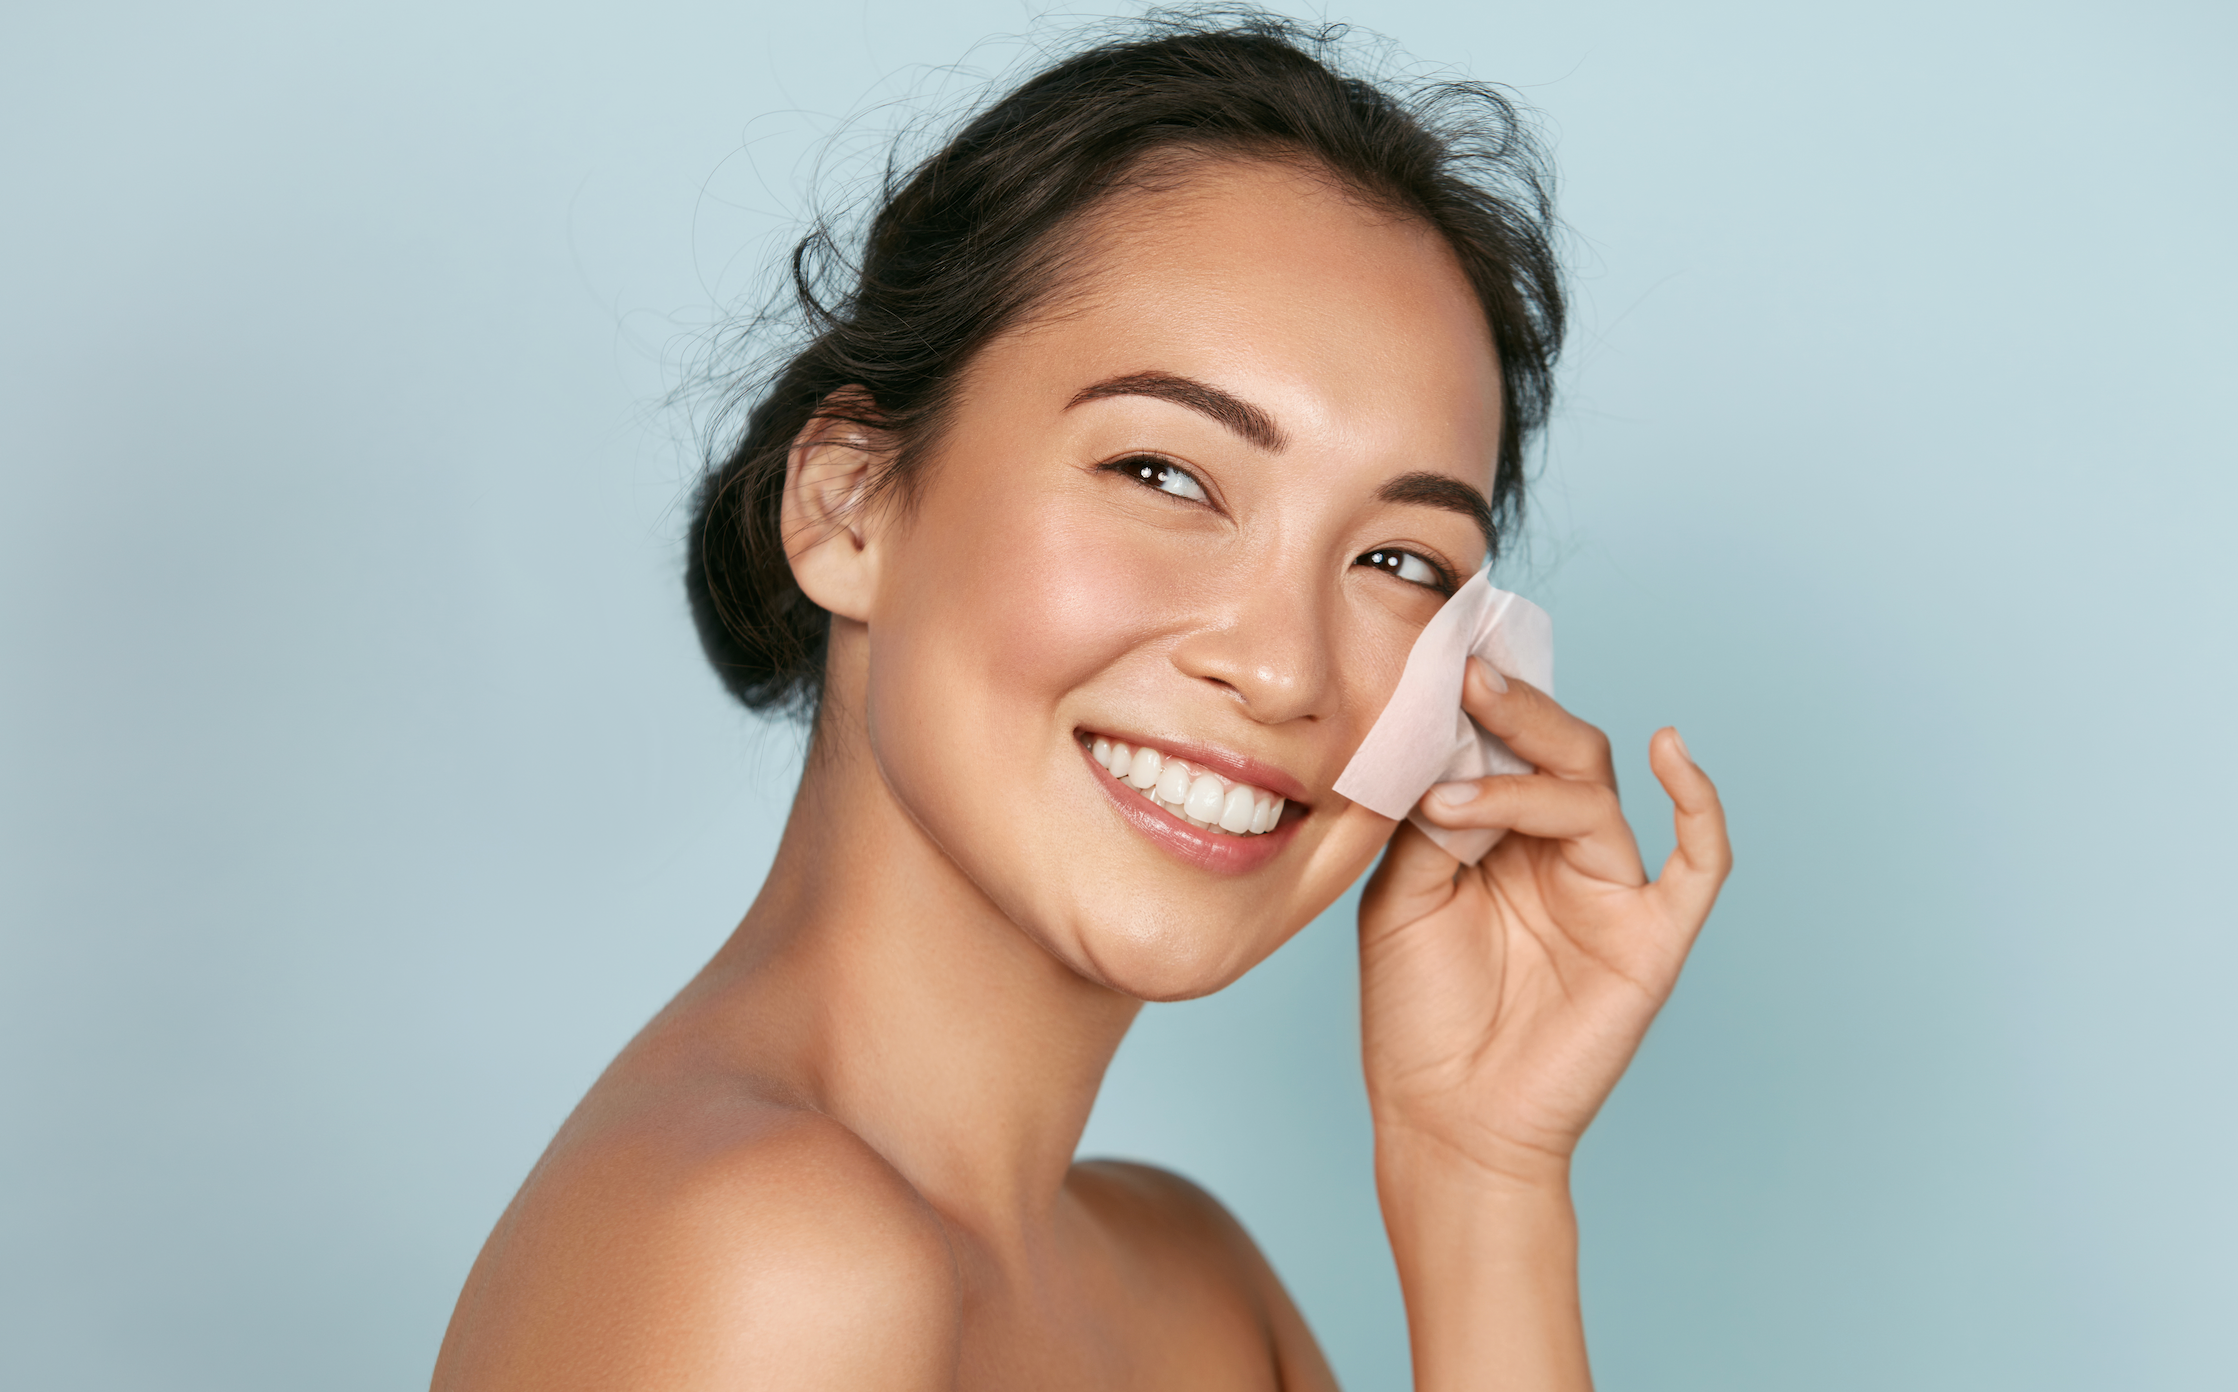 Oily skin: Skincare tips to balance oil production - blog | YEARN SKIN